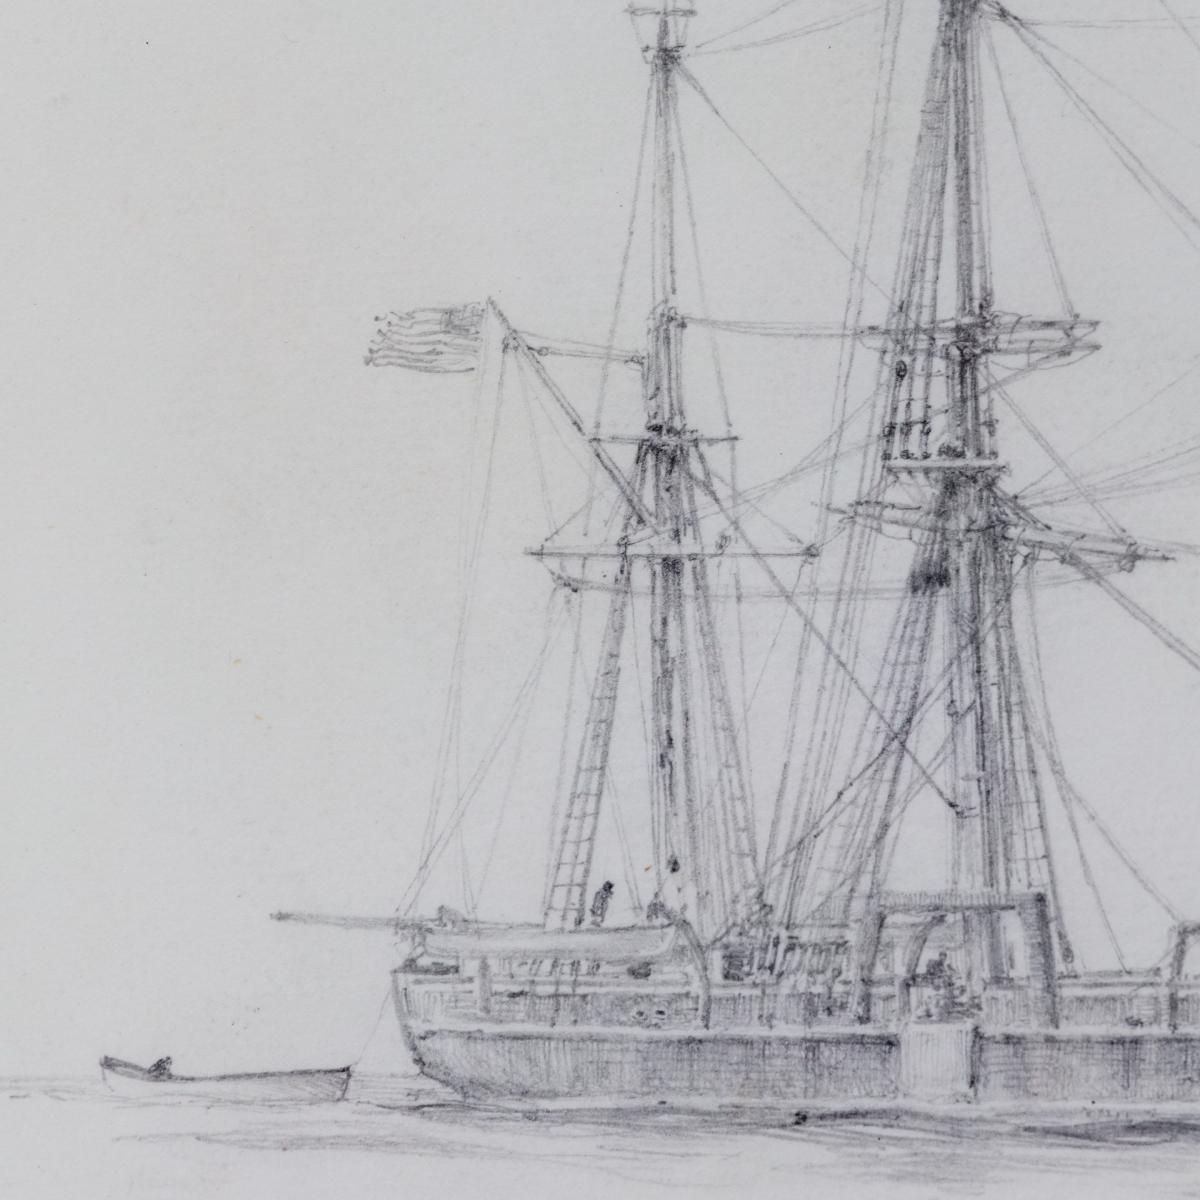 An unusual pencil drawing of “Canton“ a three masted whaling ship by Harold Wylie